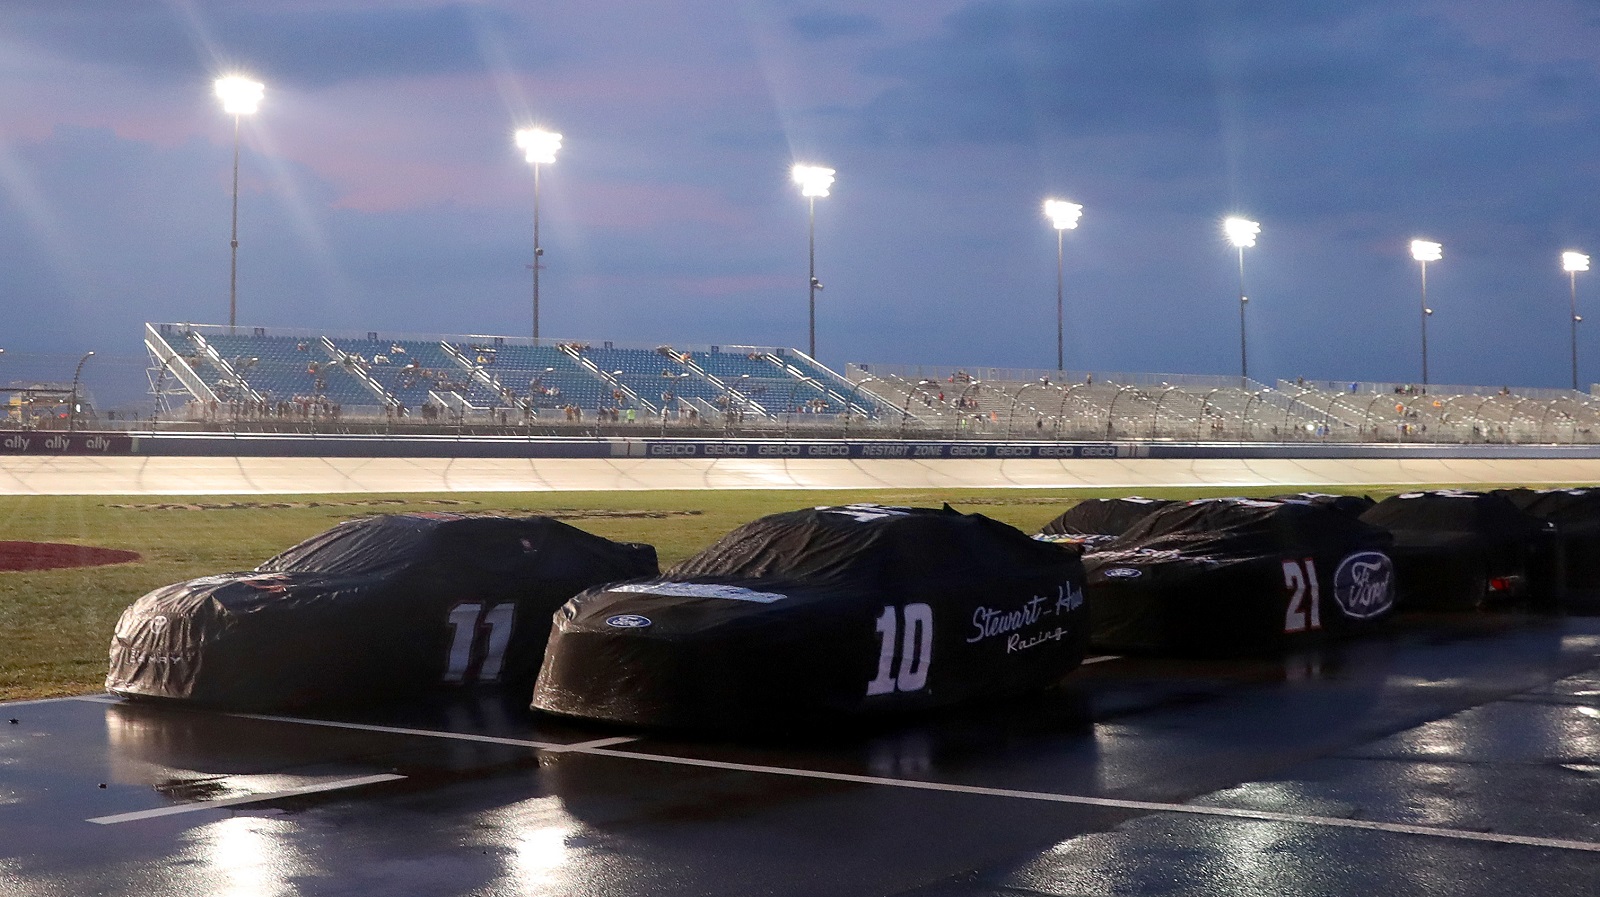 Cars sit covered on the grid during a weather delay in the NASCAR Cup Series Ally 400 at Nashville Superspeedway on June 26, 2022 in Lebanon, Tennessee.